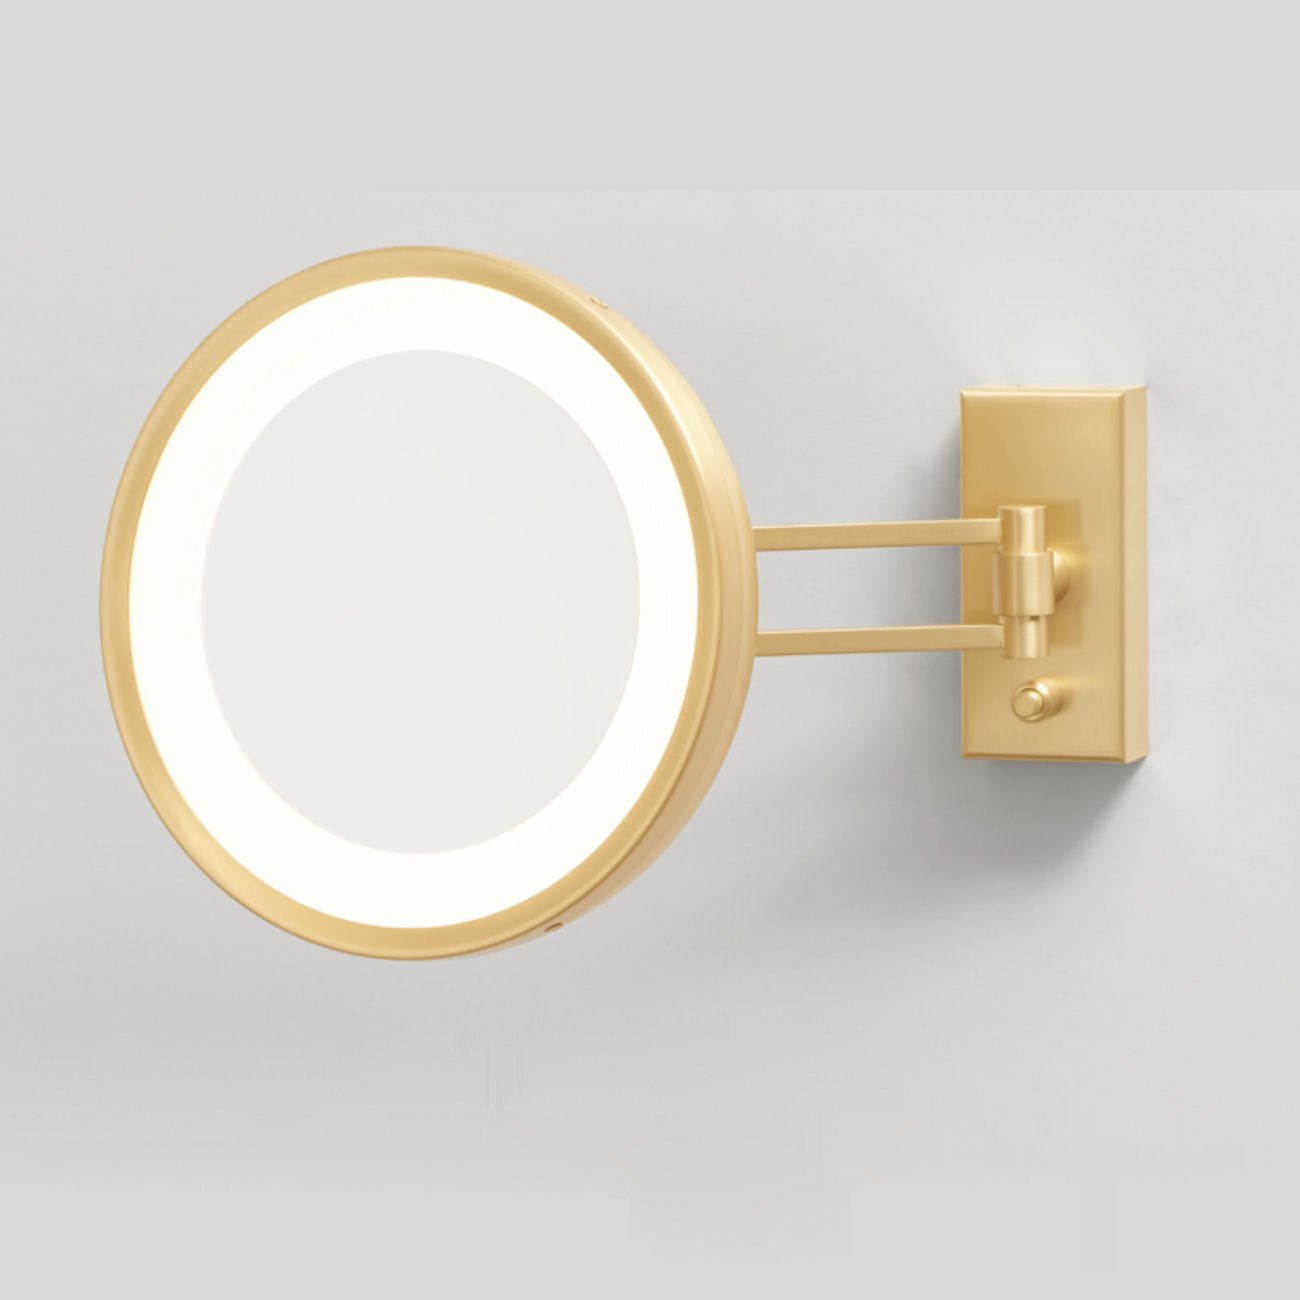 Matt Gold Wall-mounted Cosmetic Mirror by Decor Walther - |VESIMI Design|